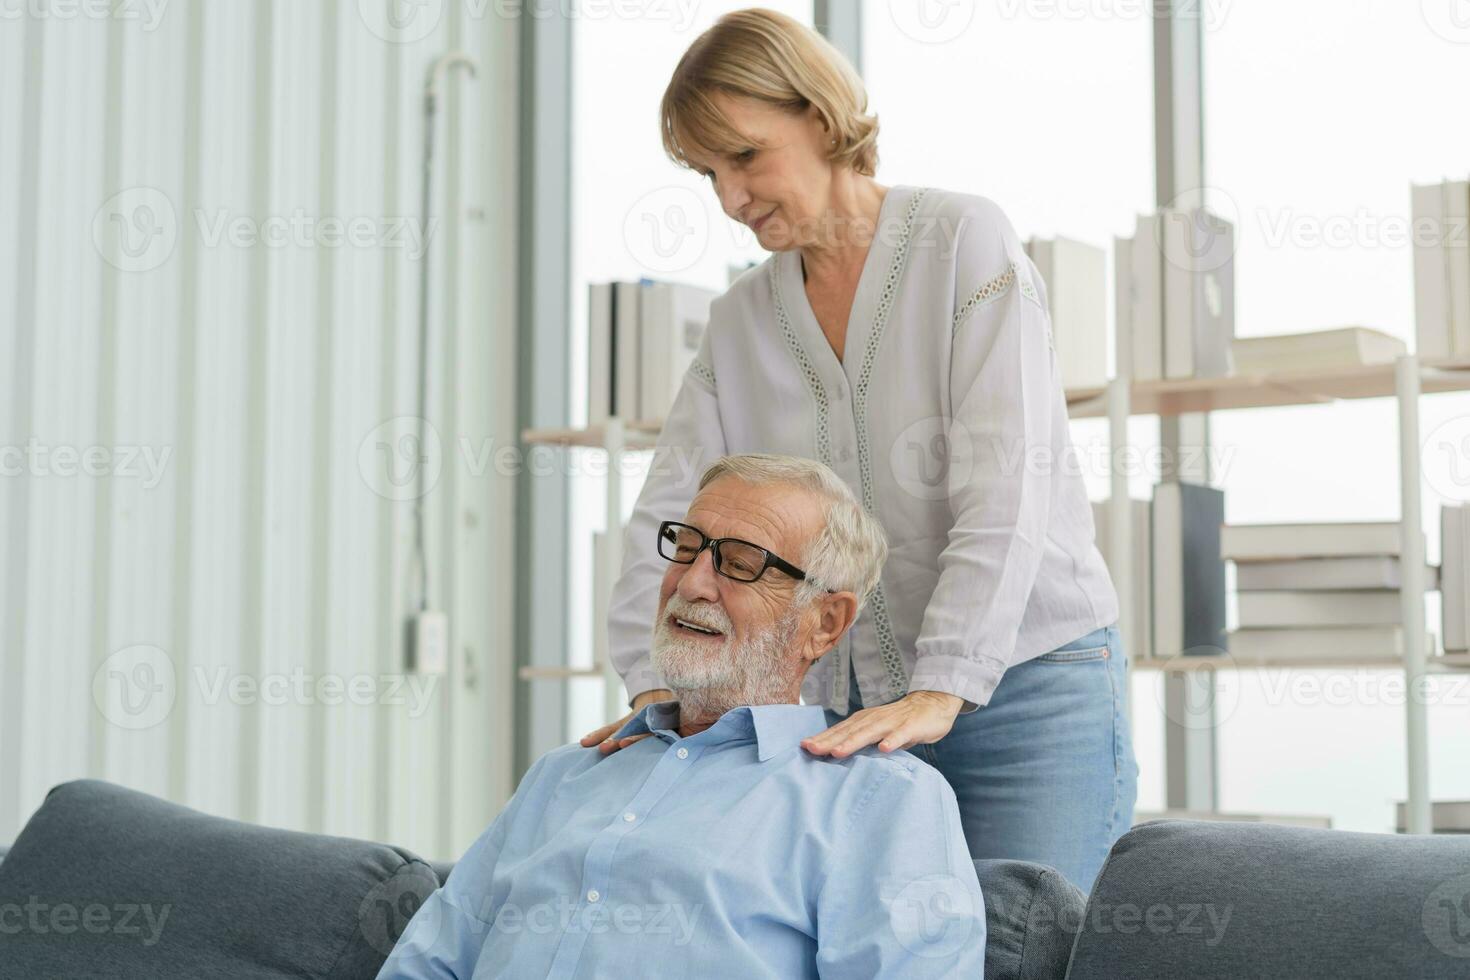 Health, body muscles stiff problem of senior couple, caucasians mature, adult retired husband, wife pain with back pain ache holding massaging rubbing shoulder hurt or sore, painful sitting on sofa. photo